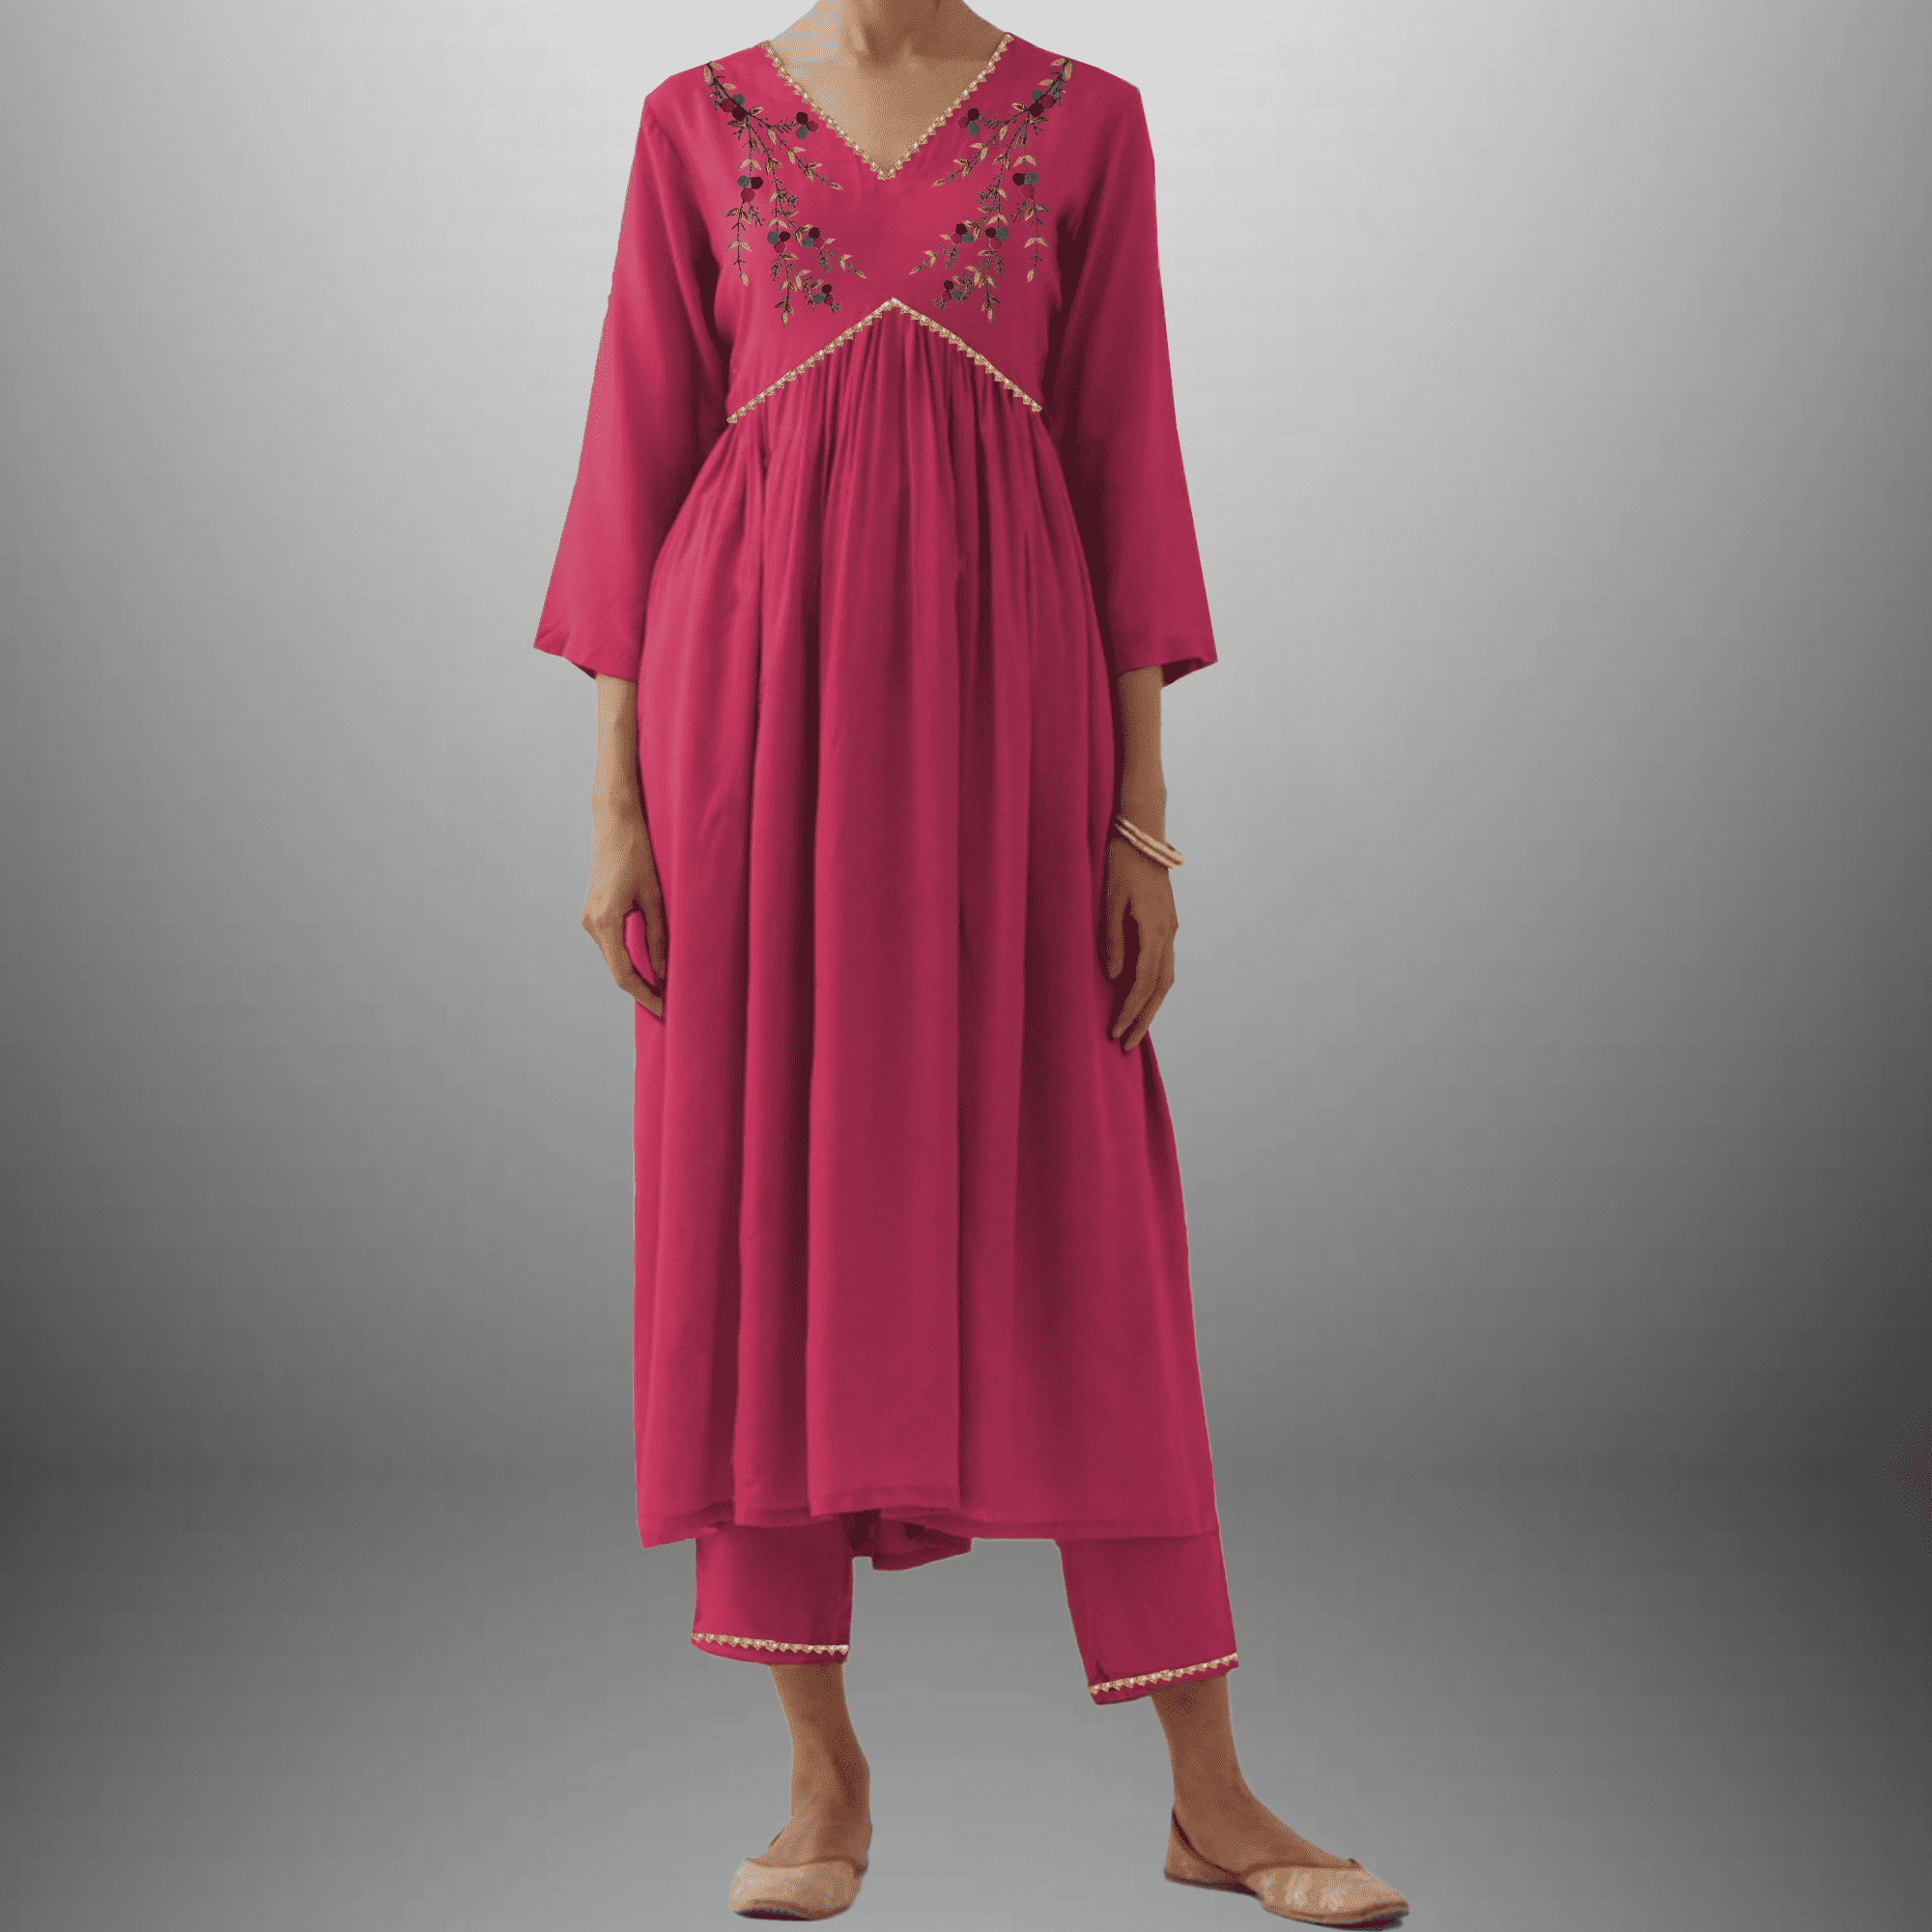 Women's Pink Kurti set with Golden lace border and Embroidery on front-RWKS049